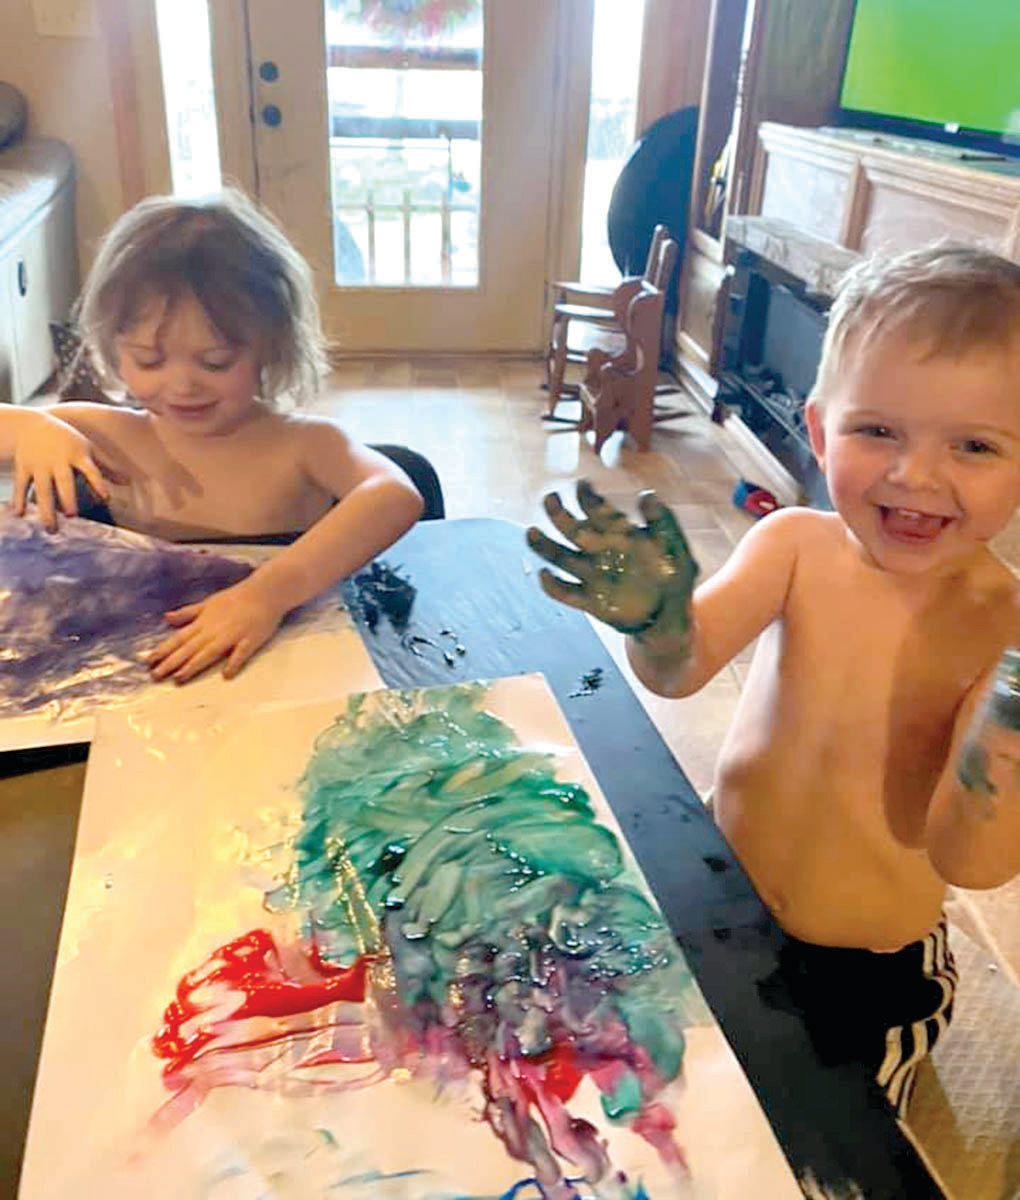 Rylee and Lucas Sneller have fun finger-painting while school is out.